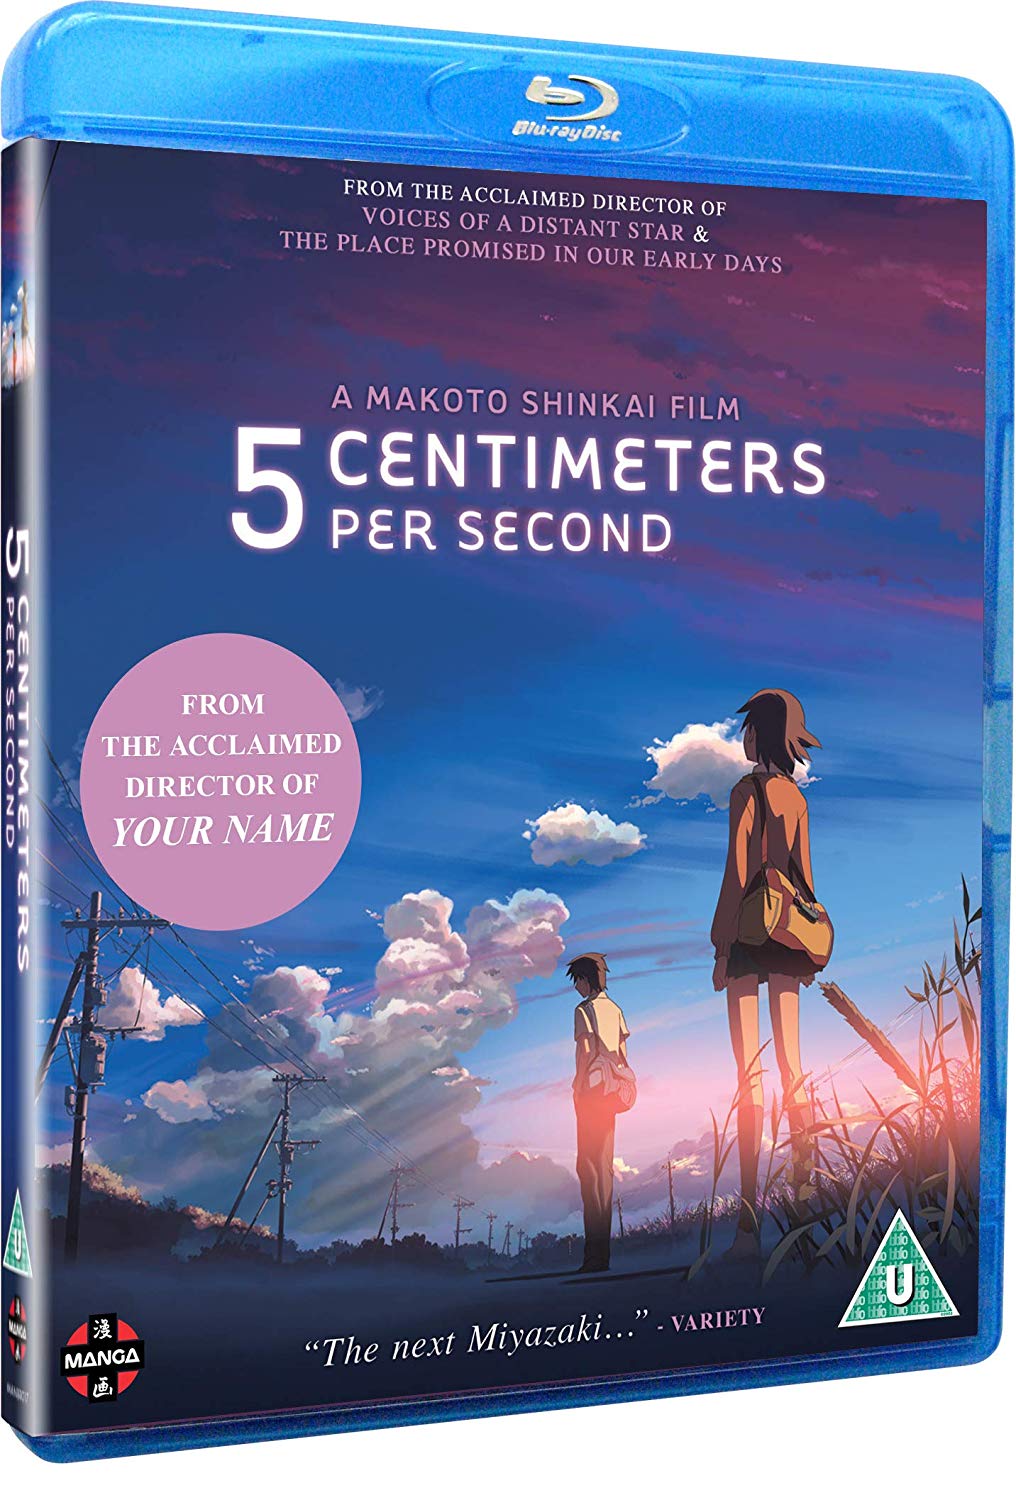 5 Centimeters per Second streaming watch online